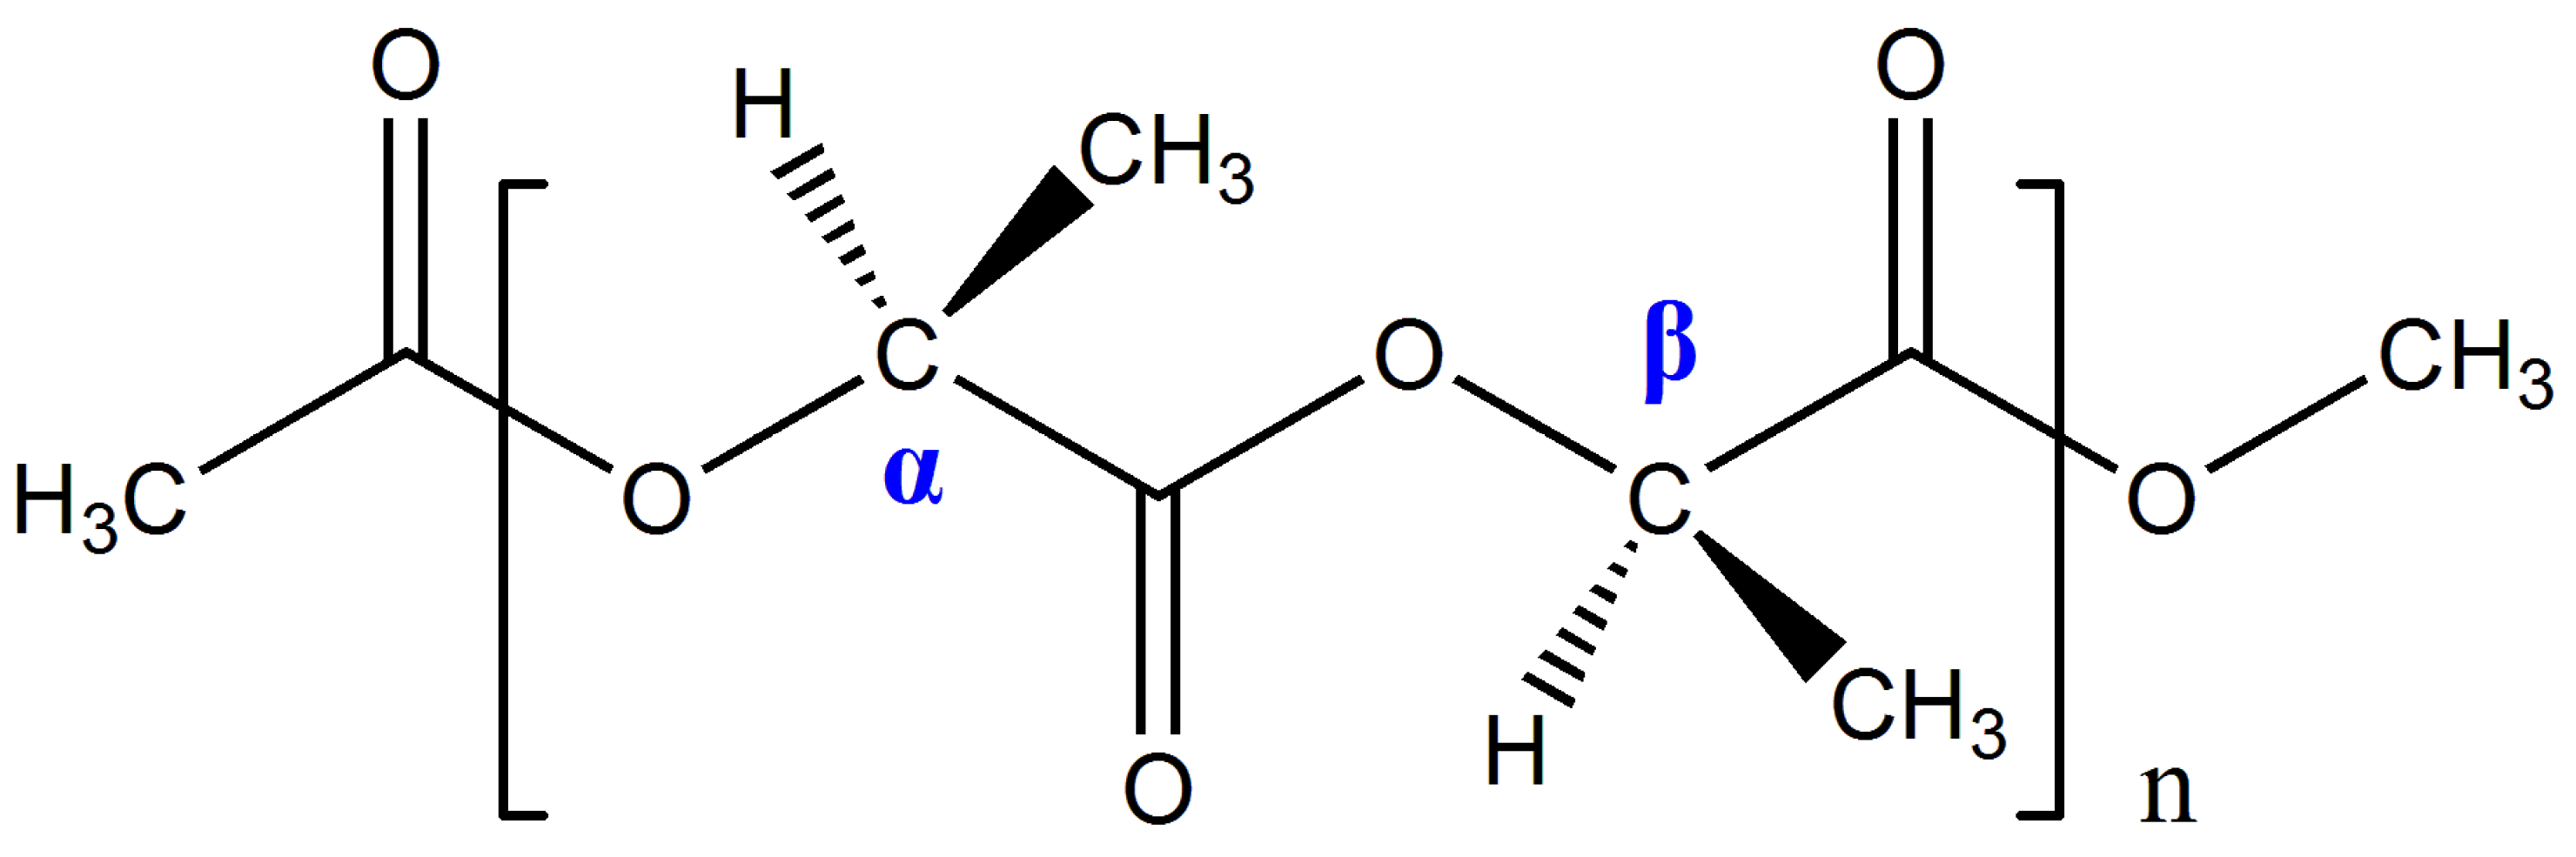 strong Figure 1/strong br/ p PLA molecular structure./p.